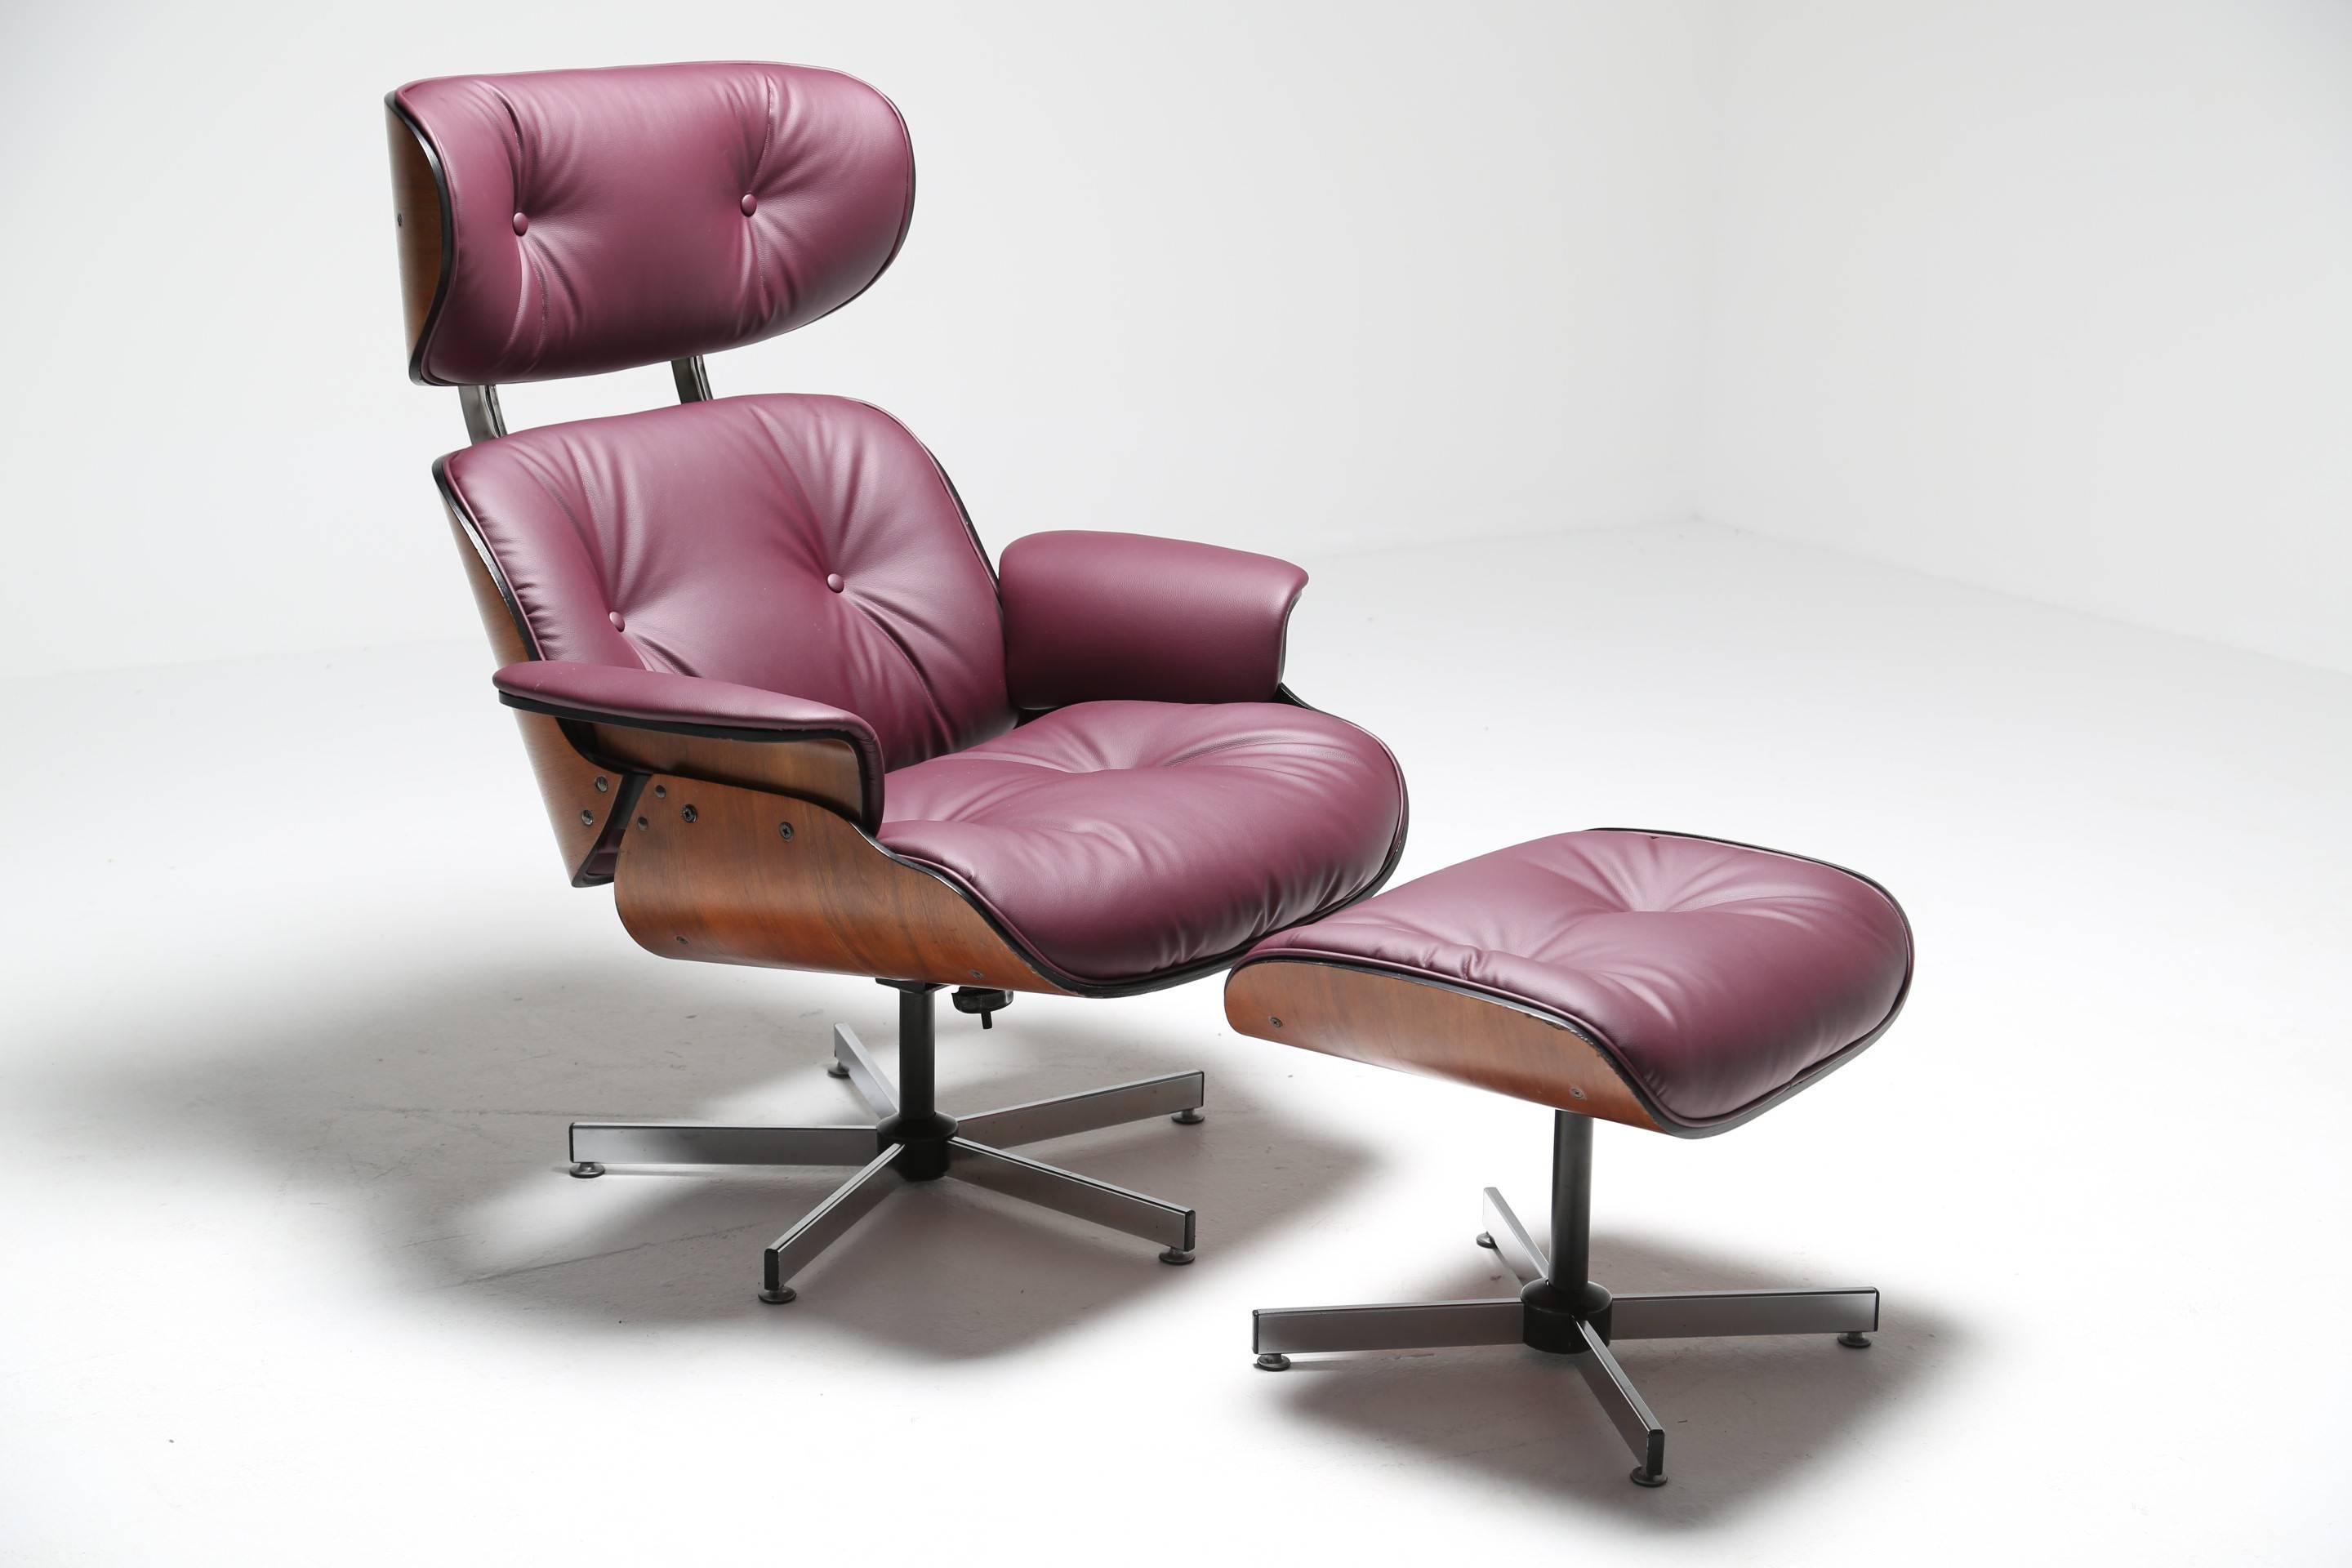 Made in the USA by Plycraft in the early 1970s, this swivel lounge chair and ottoman have been fully reupholstered to offer a modern twist on a Mid-Century staple. Traditionally this set would have been covered in black or brown but we have opted